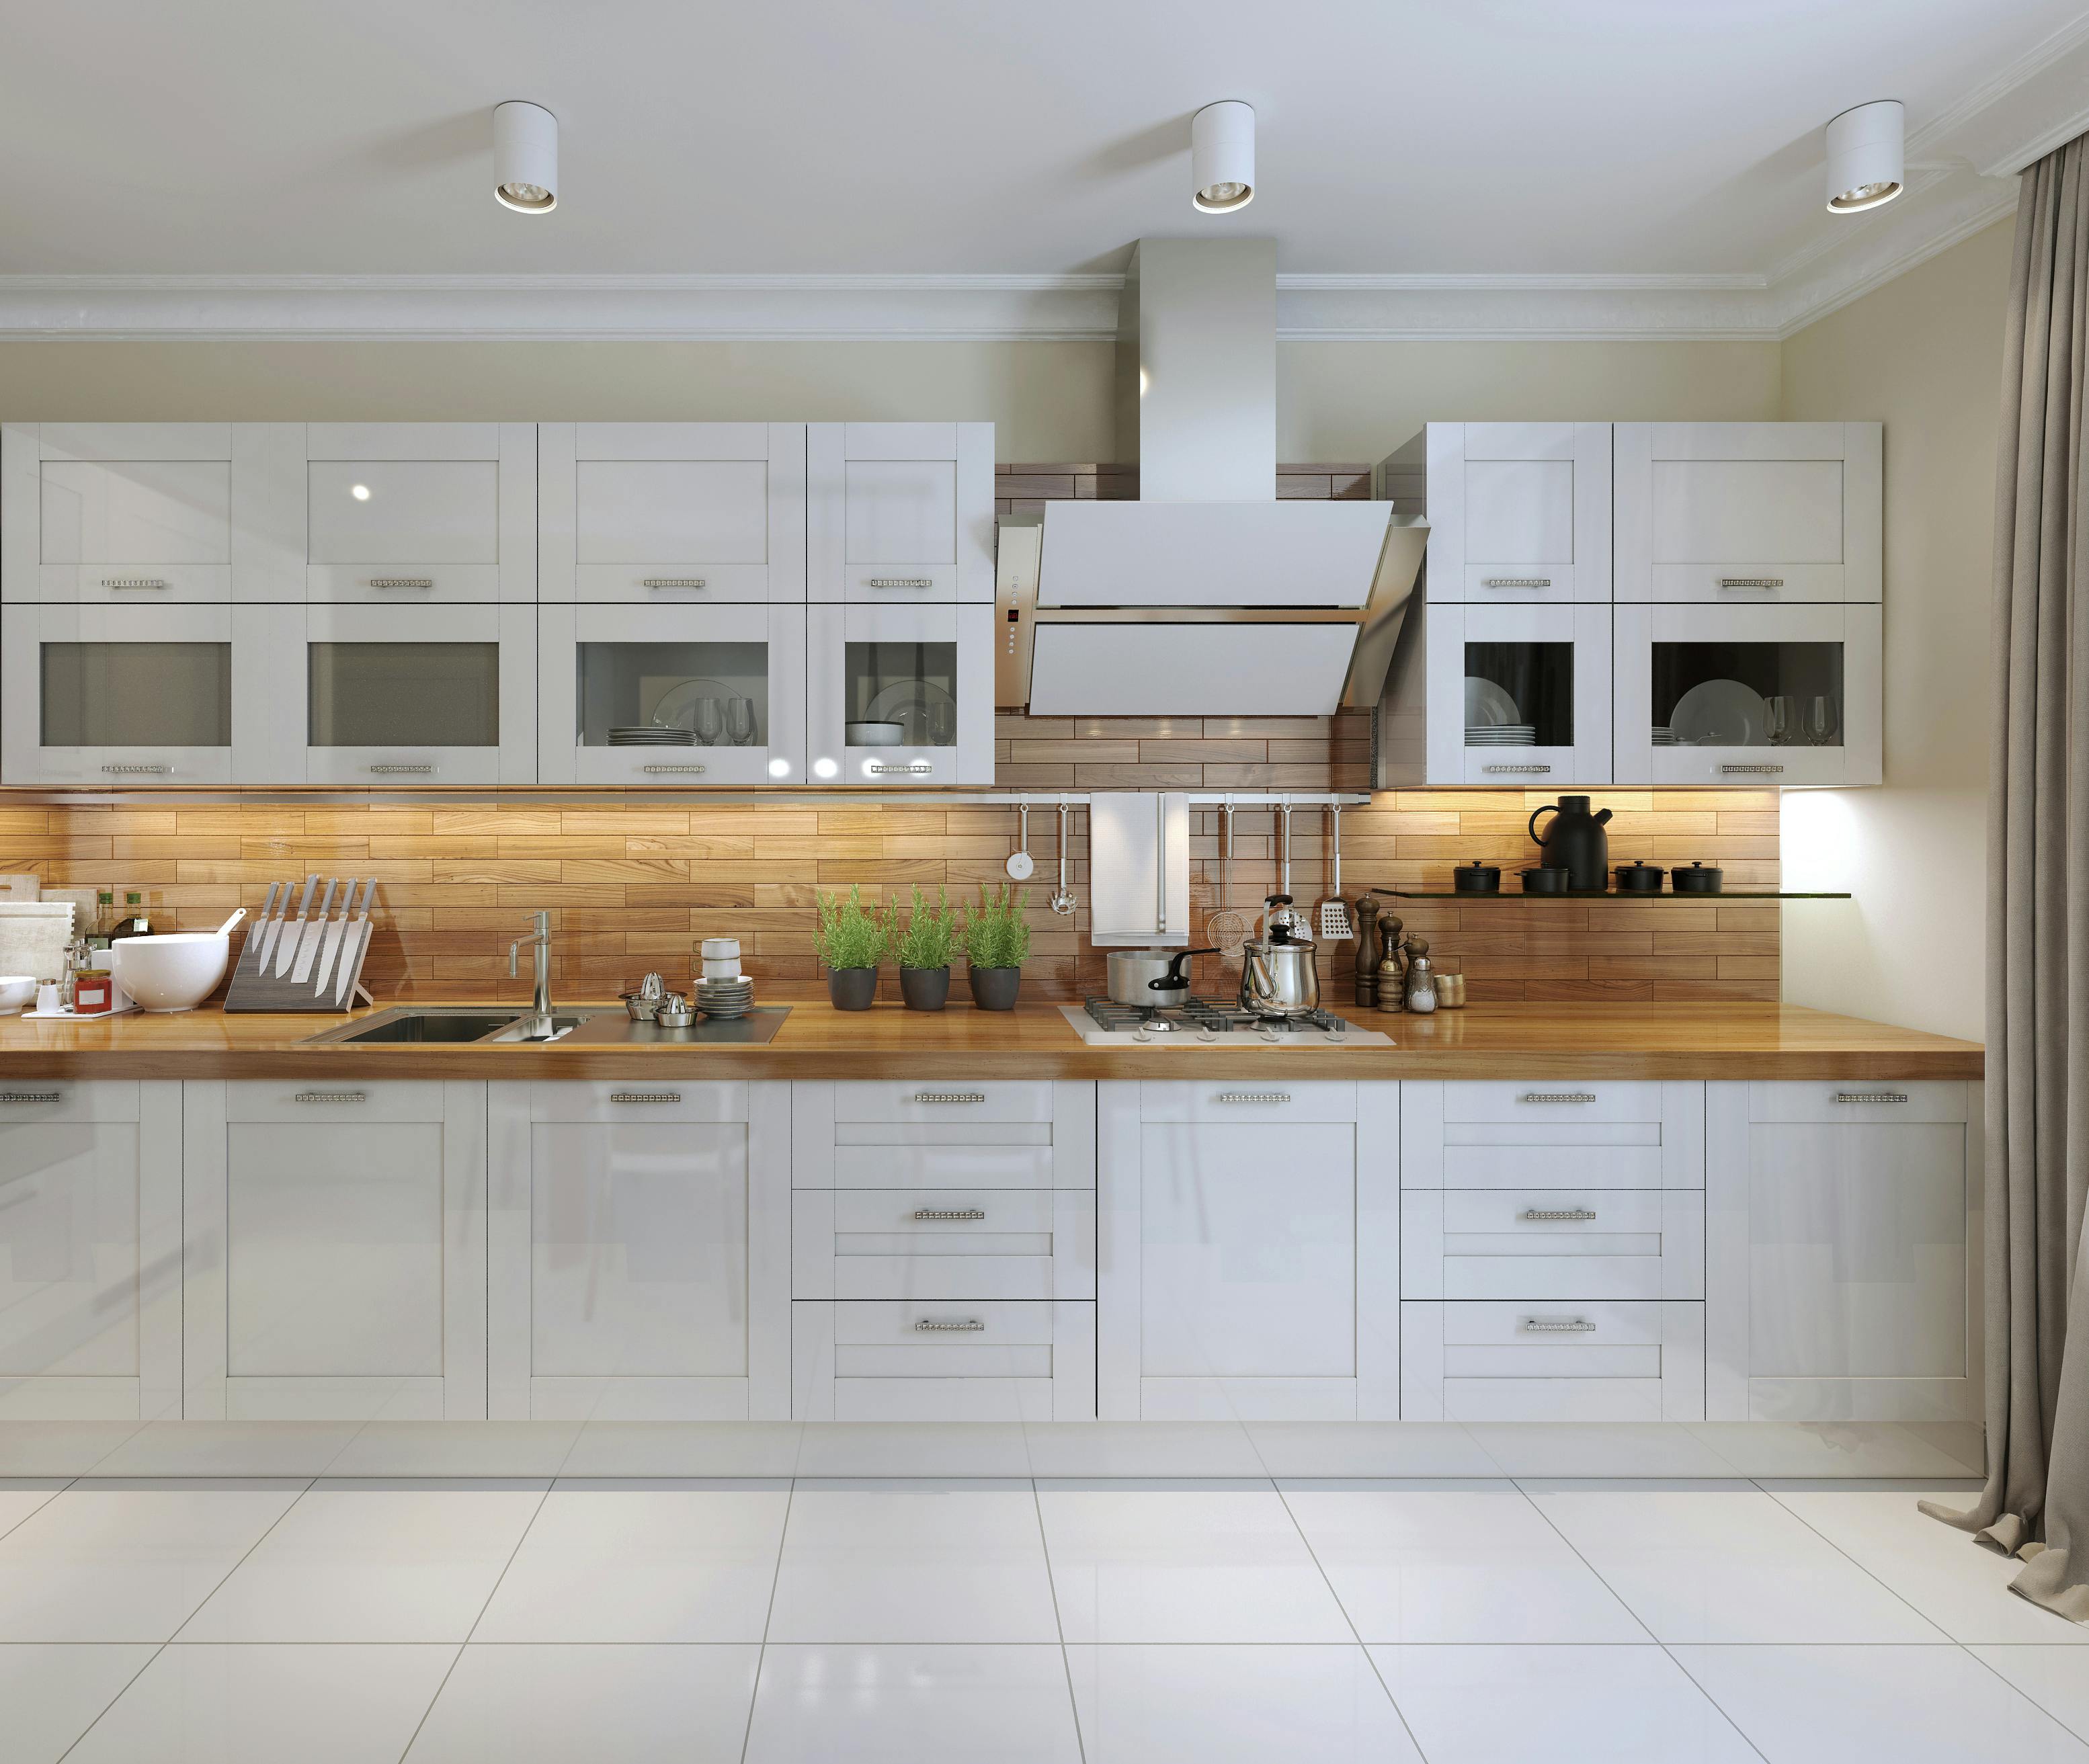 Ideas for kitchens - layout & design